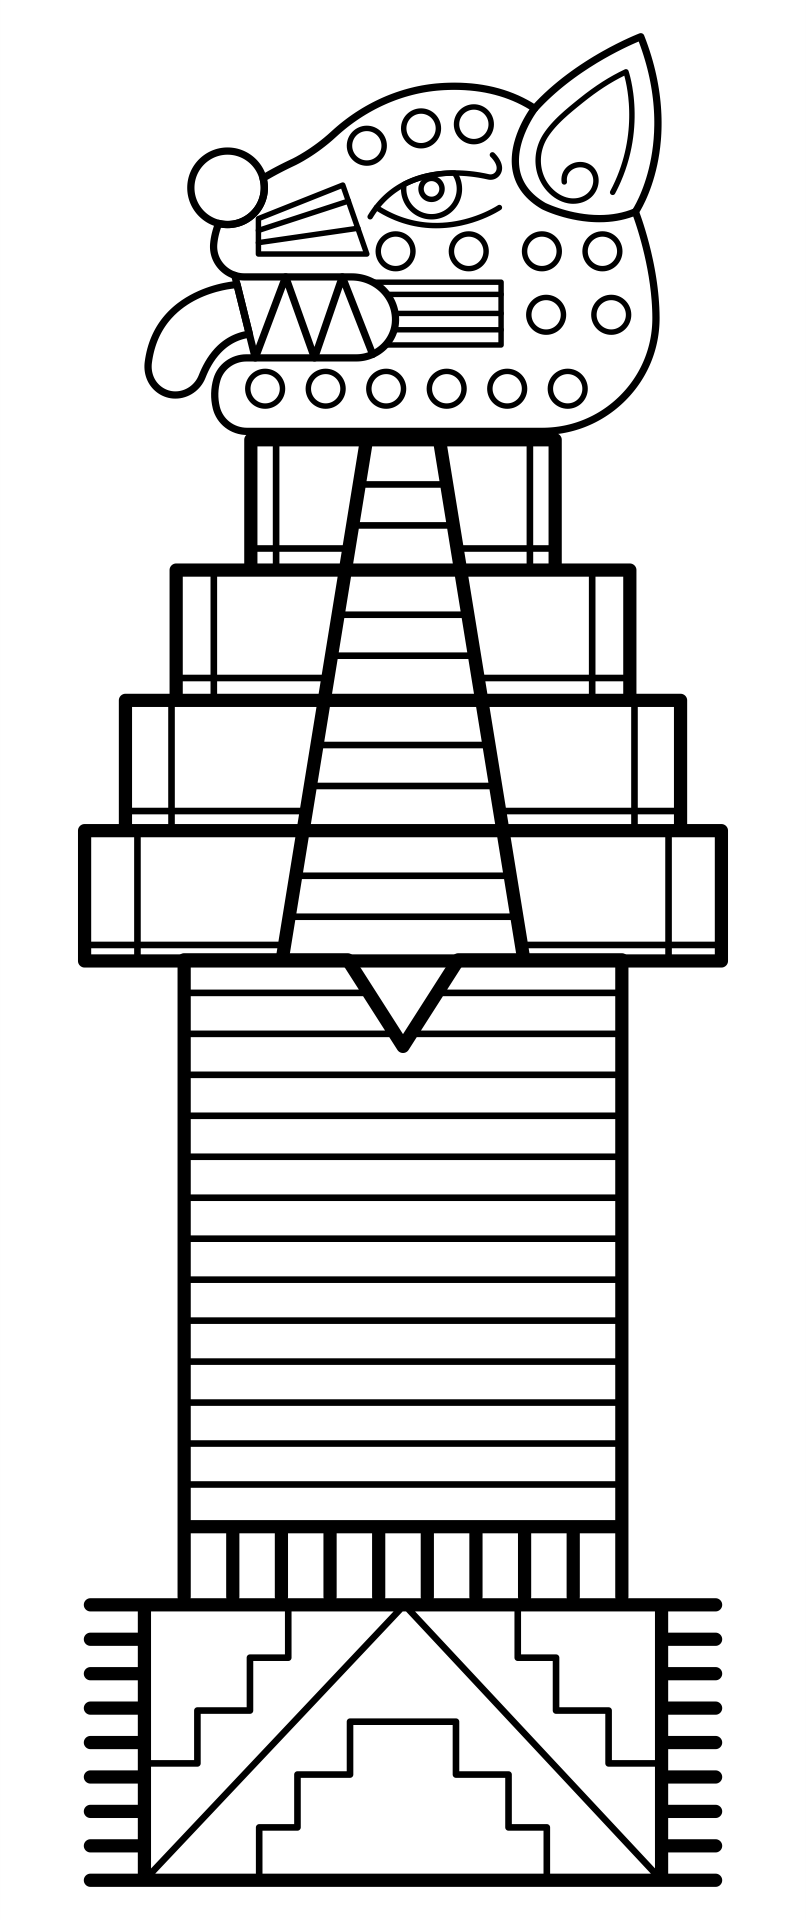 Totem Pole Coloring Page